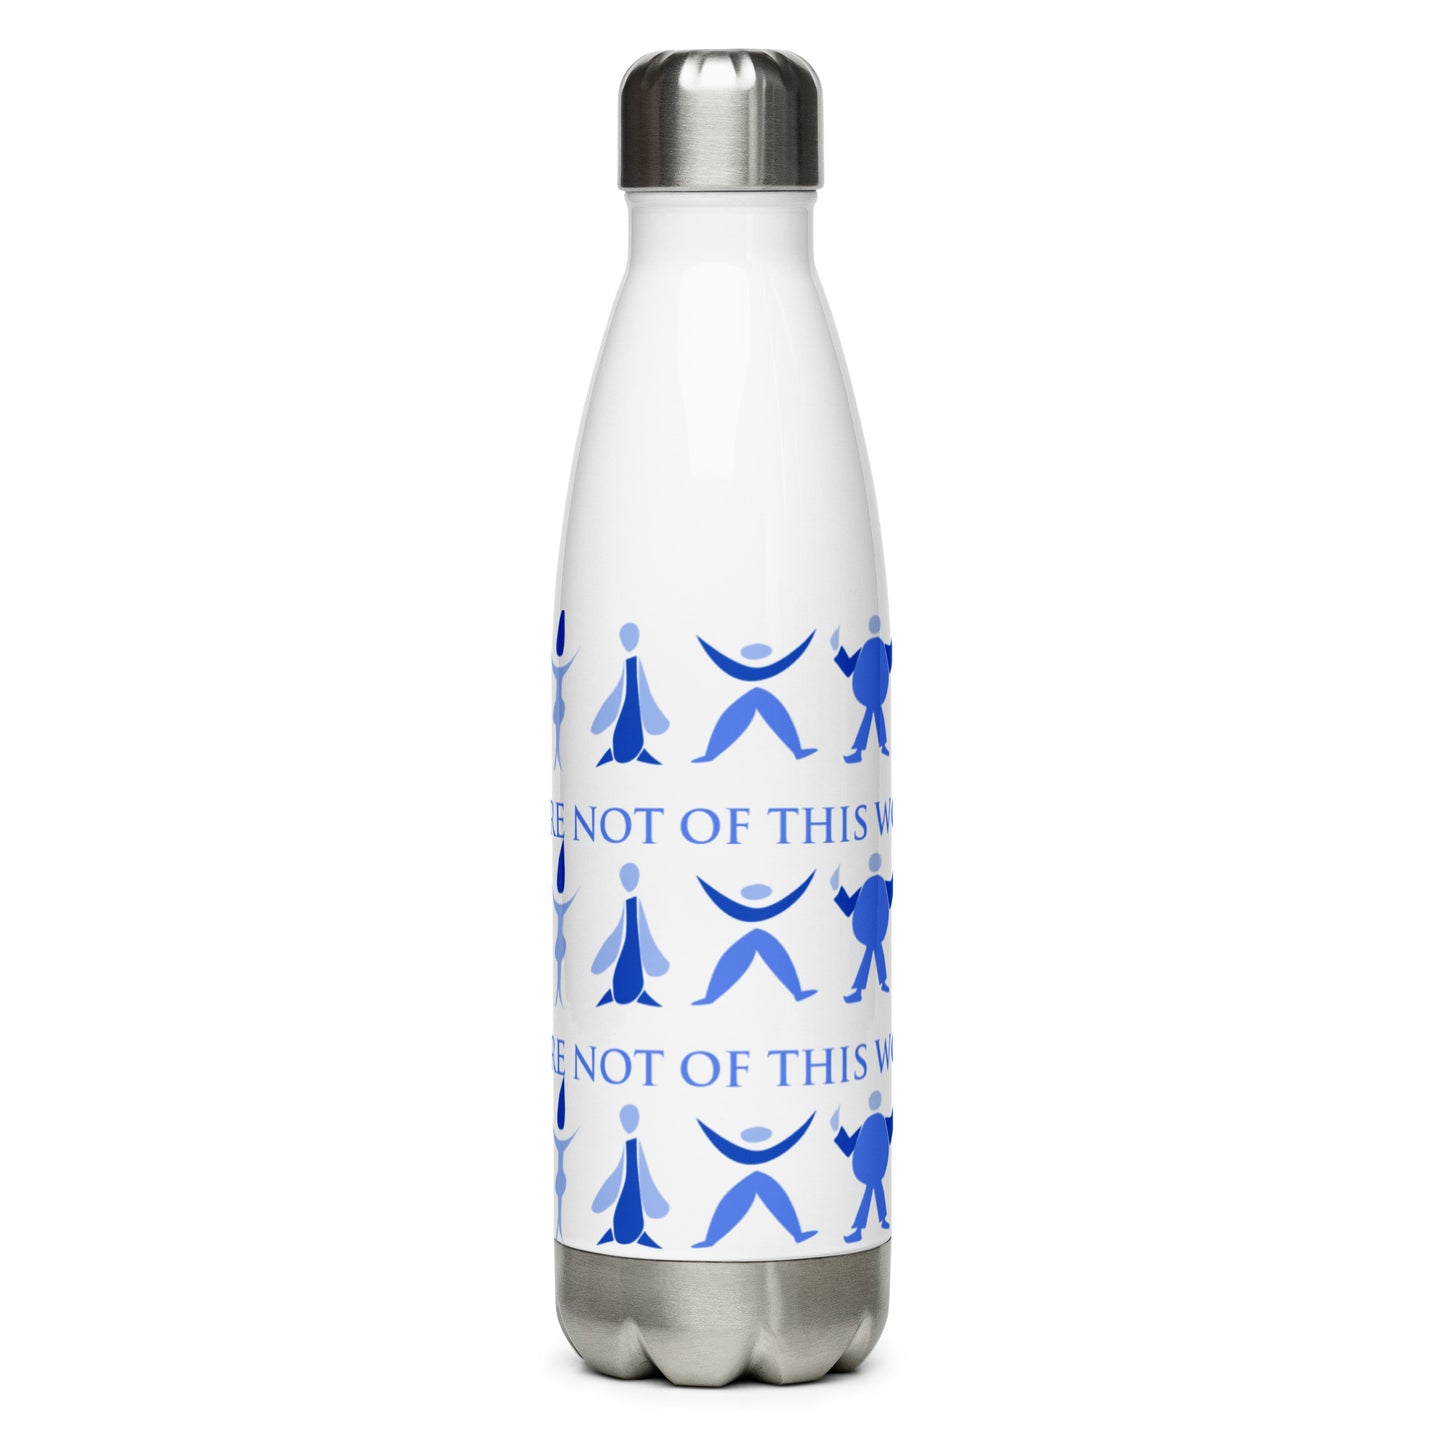 We Are Not of This World Stainless Steel Water Bottle